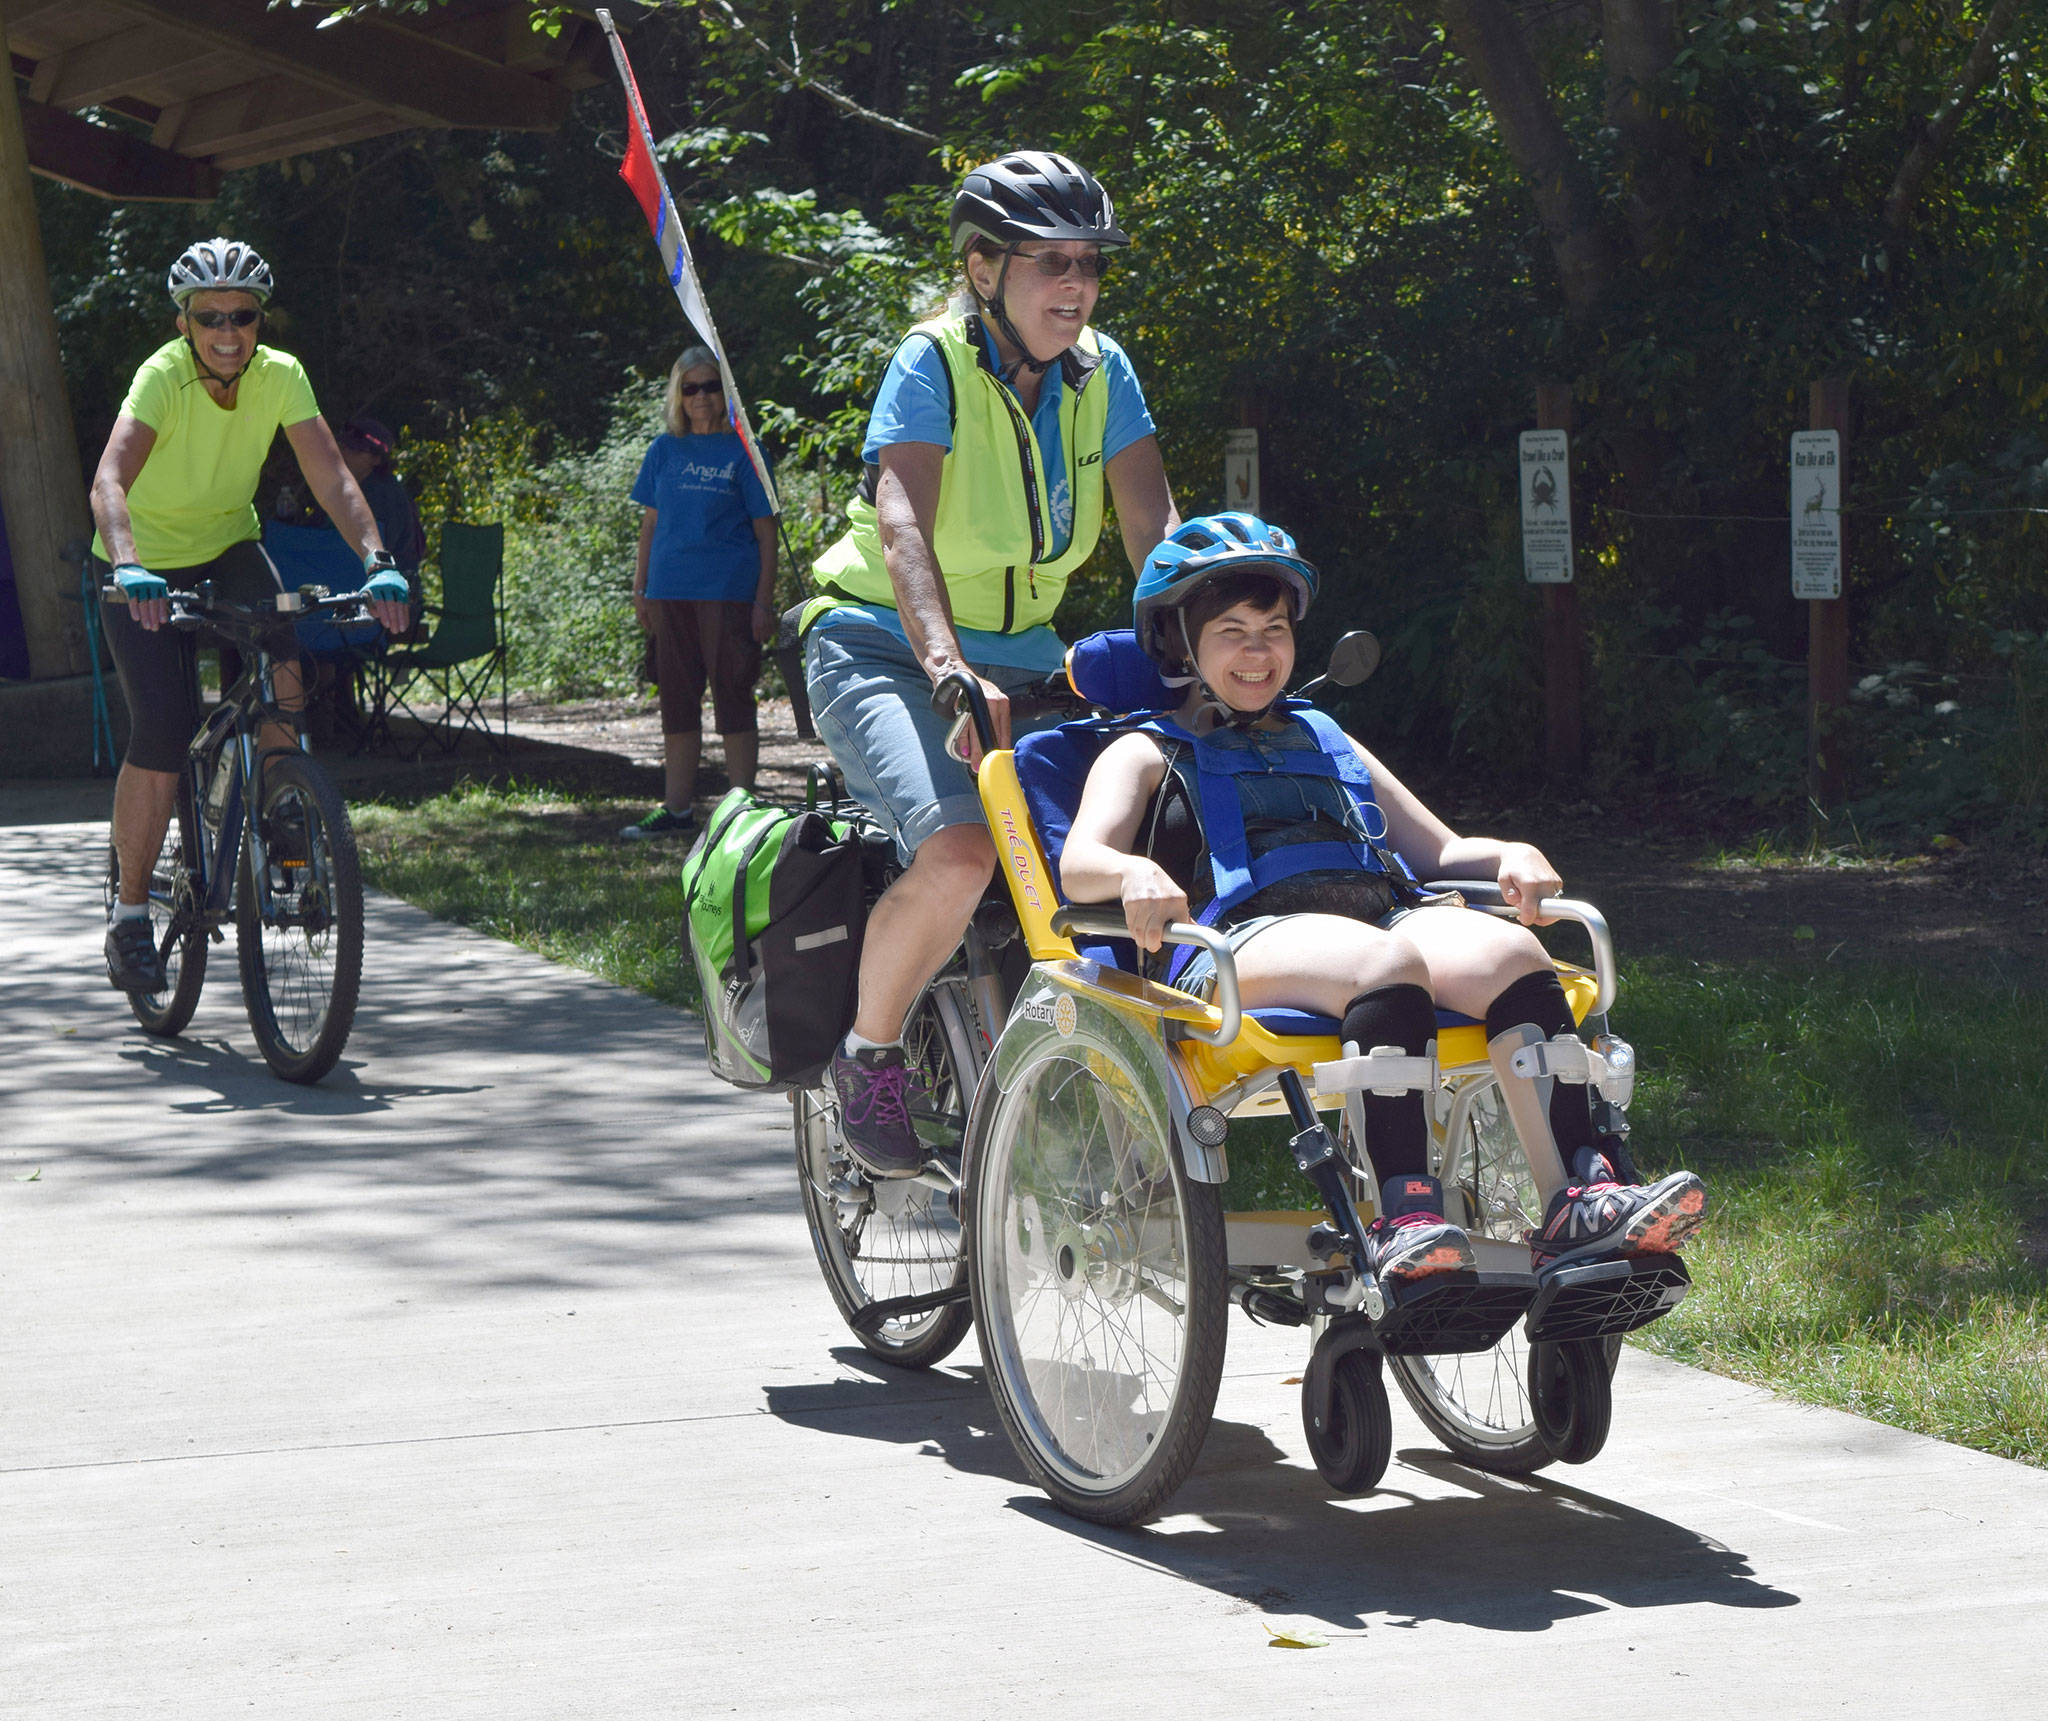 Piloted by Sequim Wheelers volunteer Elaine Cates, center, Kaitlyn Winn, foreground, enjoyed a ride on a duet wheelchair bicycle during a Clallam Mosaic sponsored field trip to Railroad Bridge Park on July 13. Riding as a safety was Sequim Wheelers volunteer Michele Fraker. Submitted photo